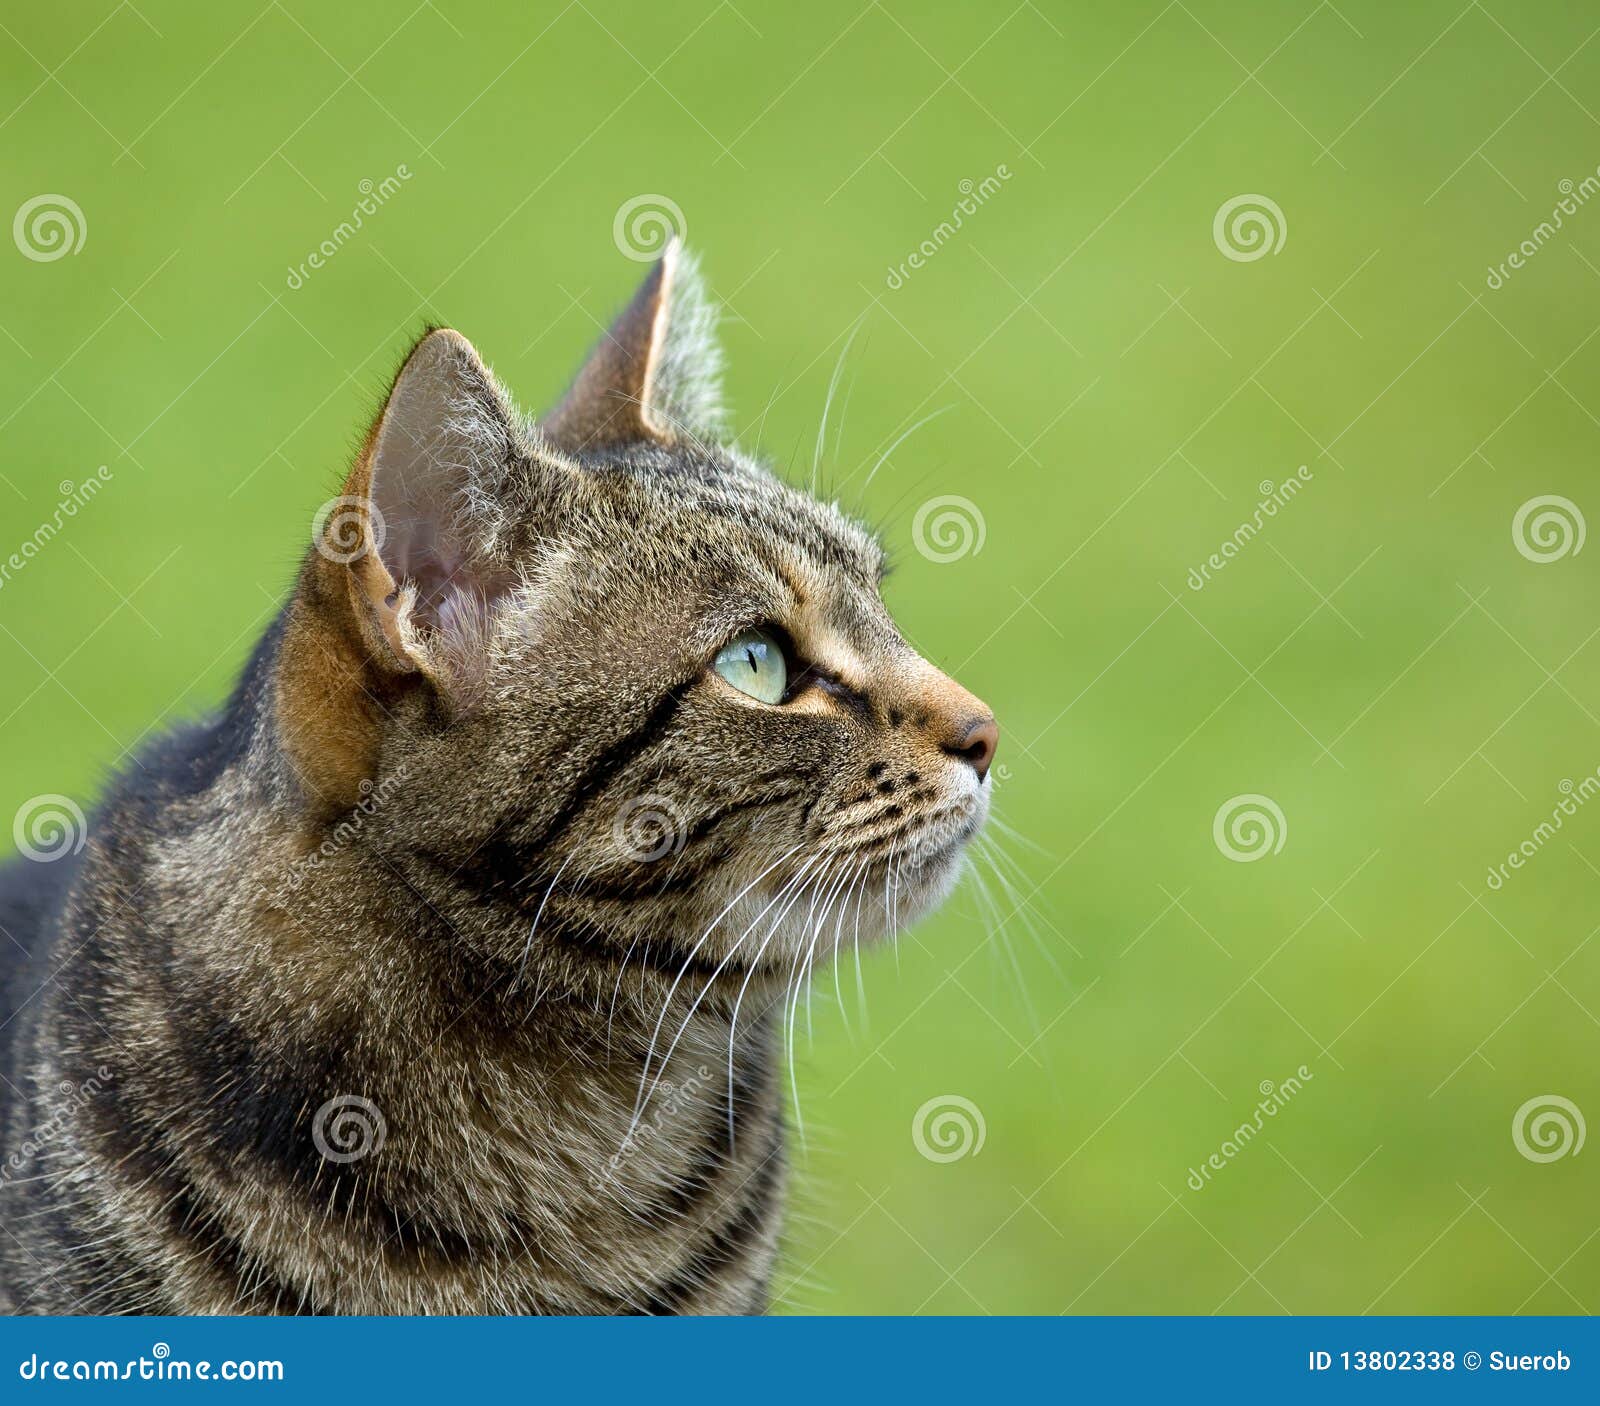 786 Tabby Cat Head Profile Photos Free Royalty Free Stock Photos From Dreamstime